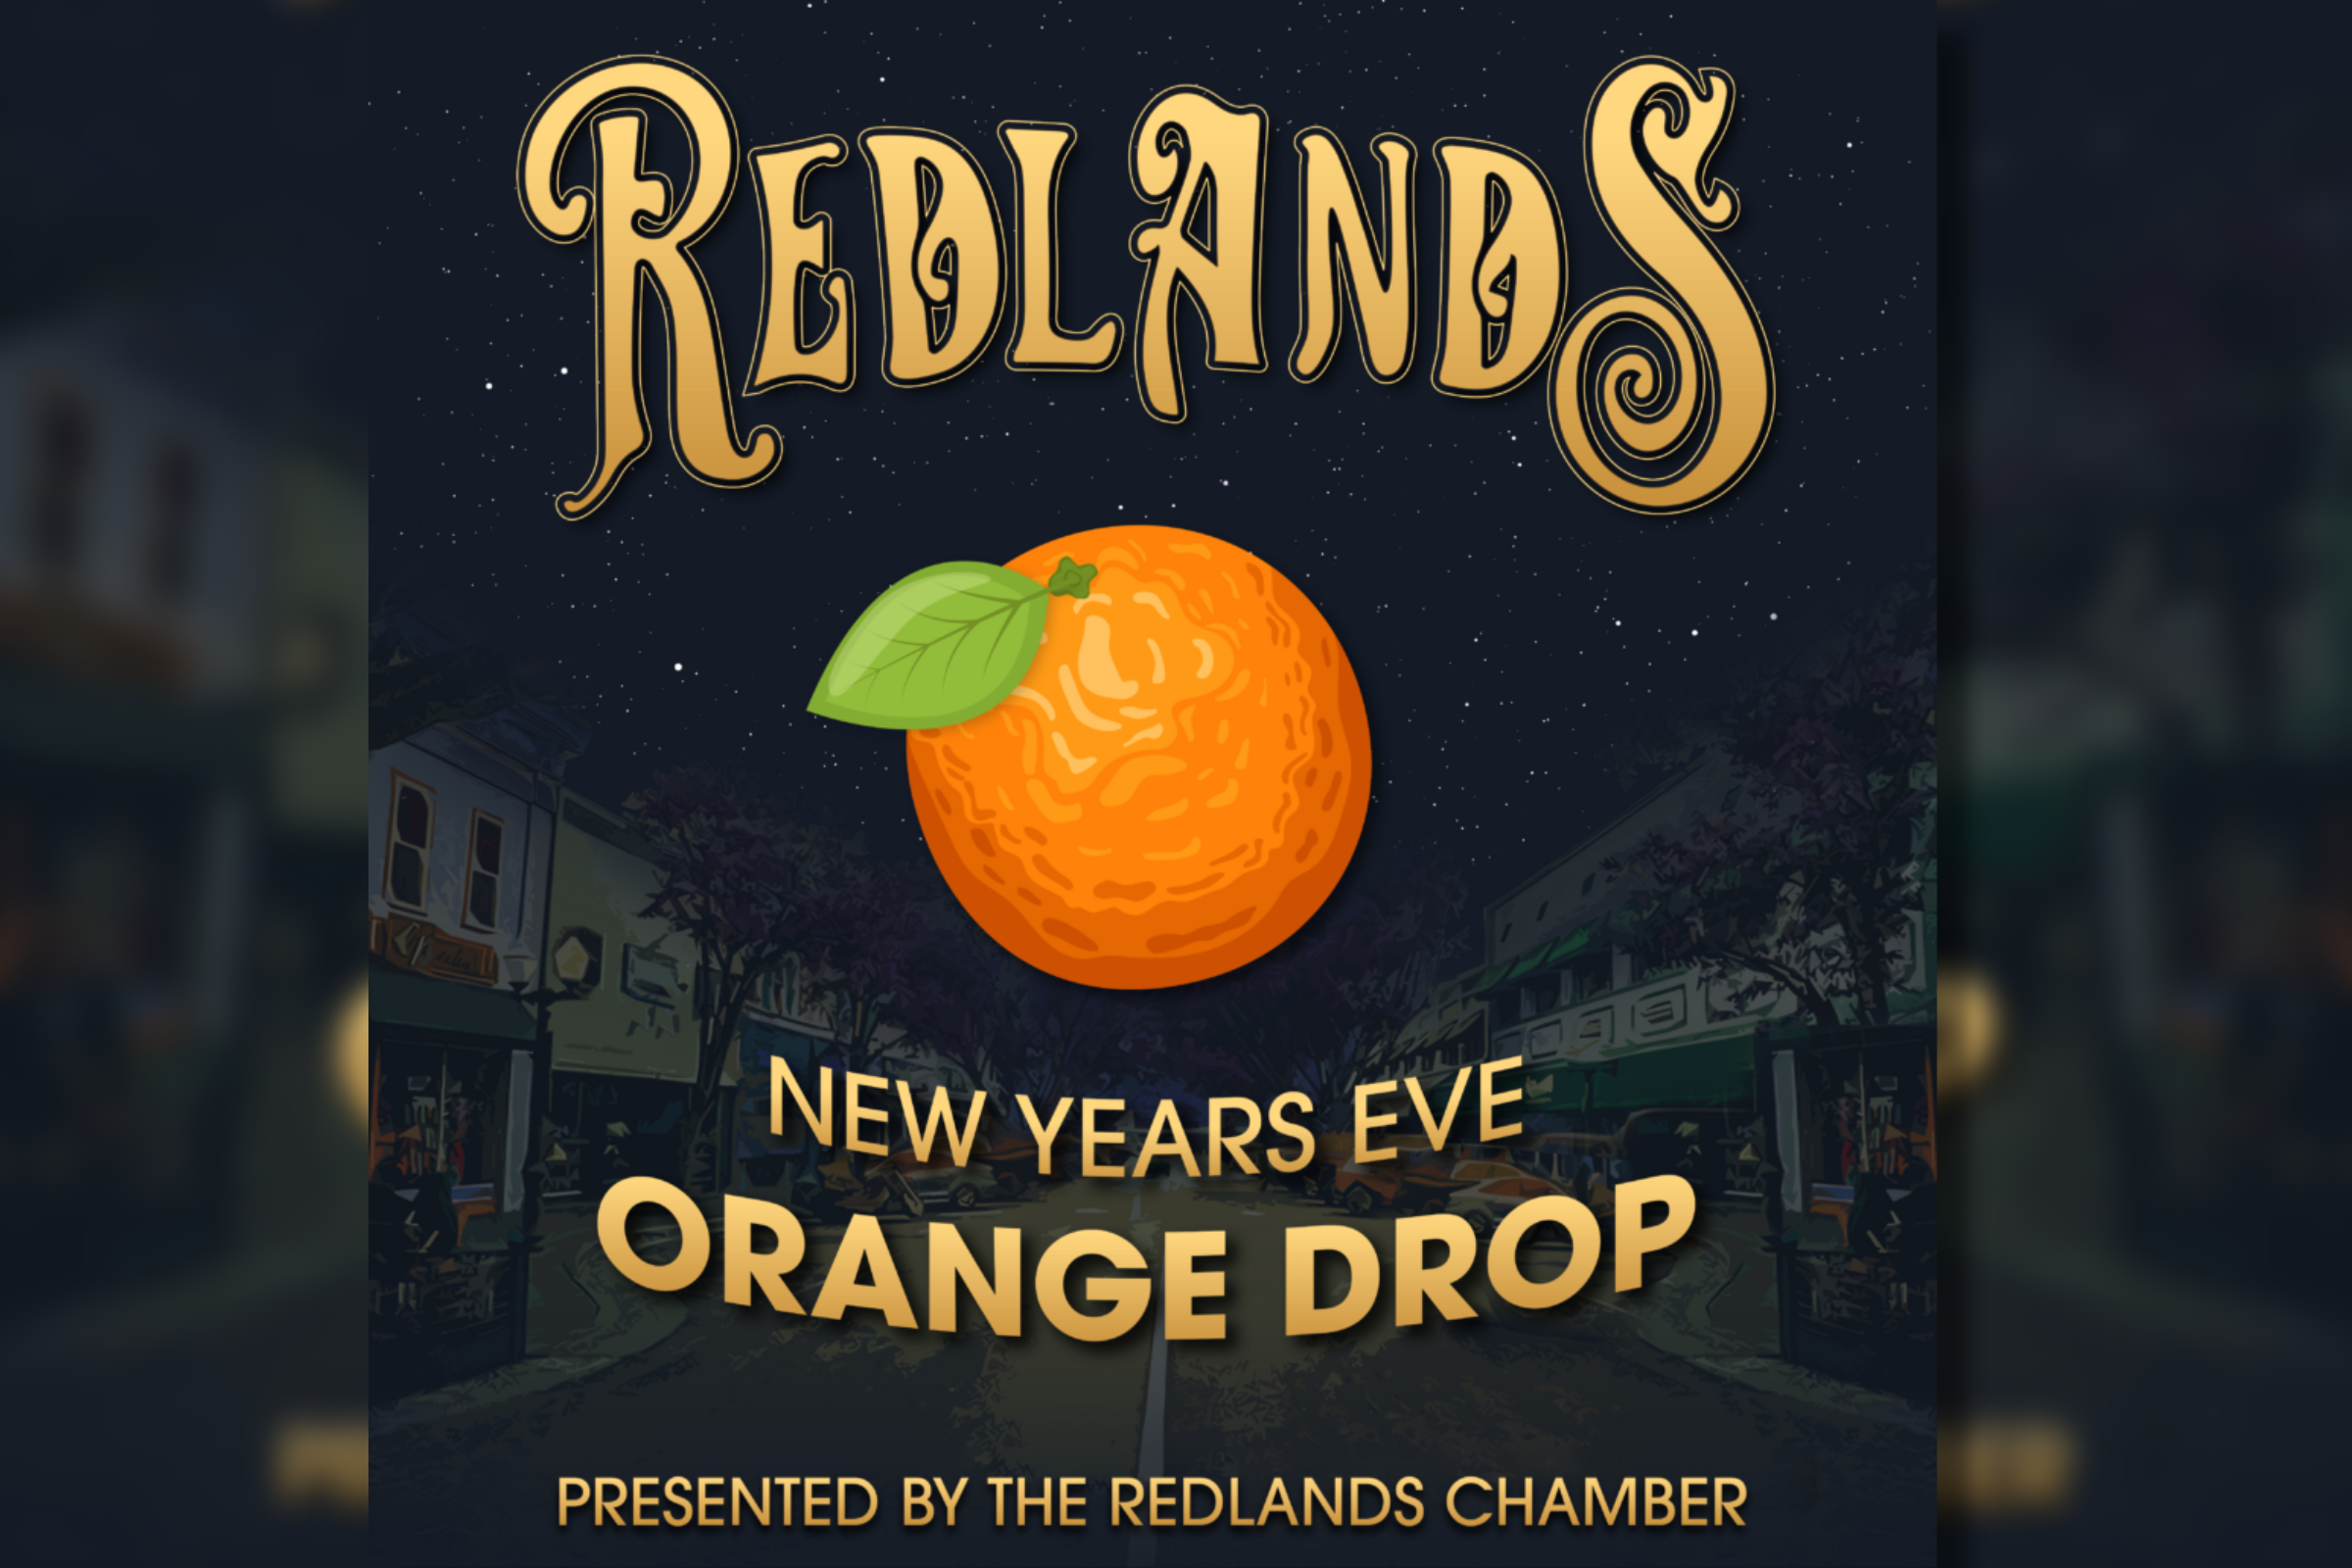 Redlands to ring in the new year with return of iconic 'Orange Drop'